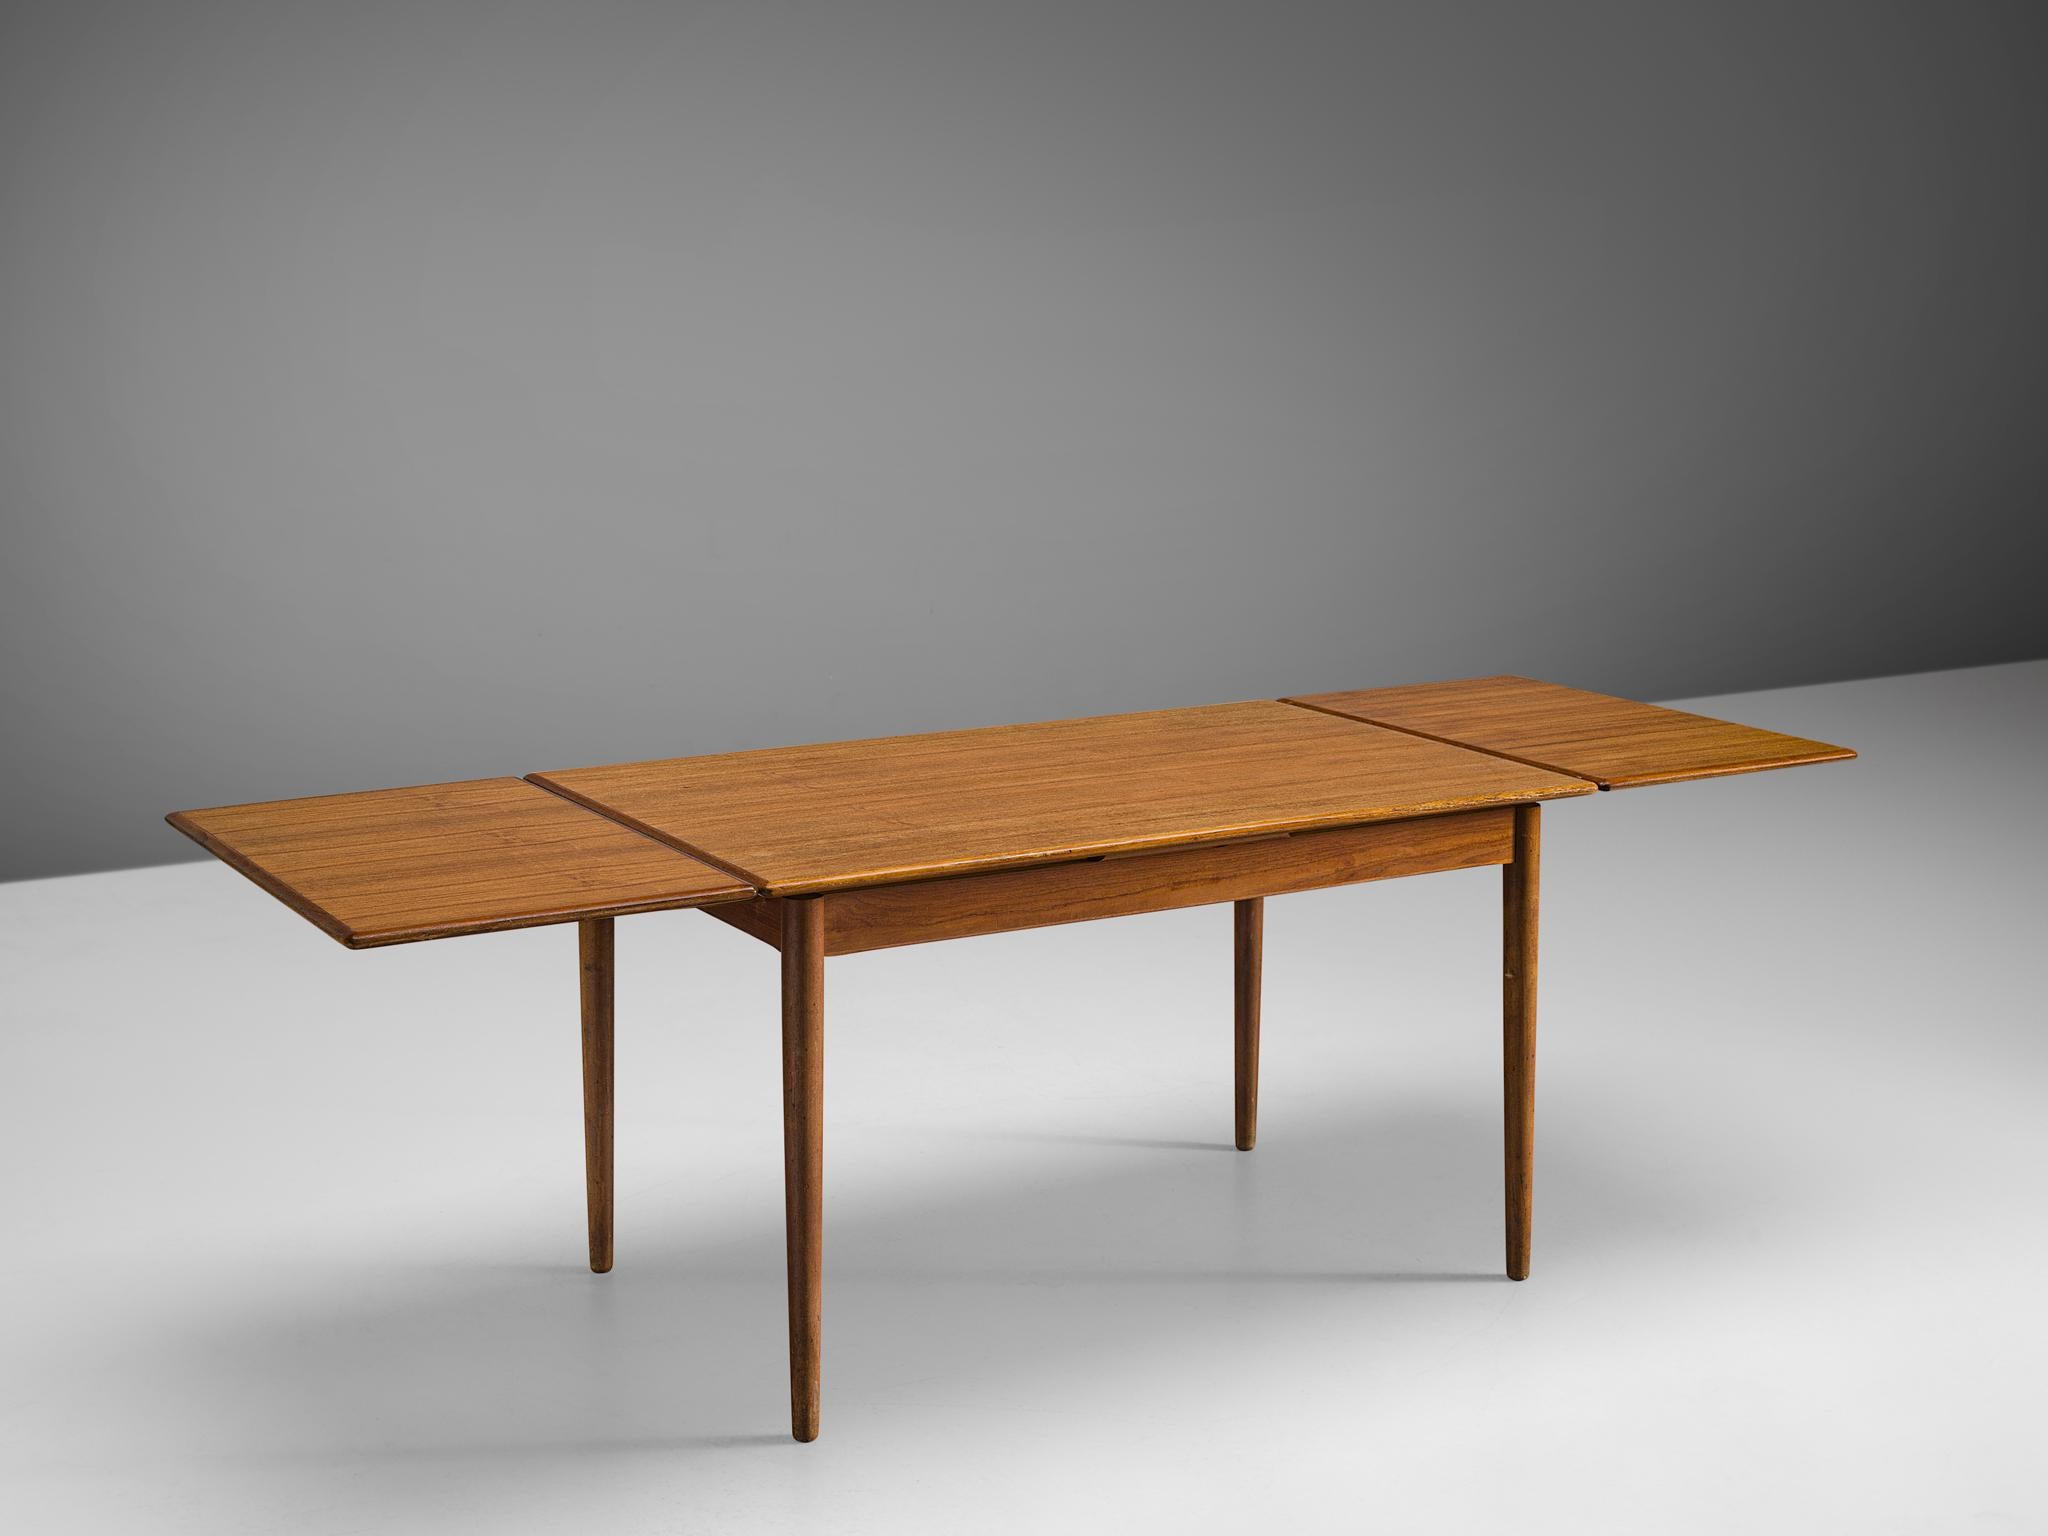 Dining table, teak, Denmark, 1950s

Crafted from exquisite teak wood in Denmark during the 1950s, this dining table displays a highly functional and timeless piece of mid-century Danish design. Its sleek and minimalist silhouette boasts a